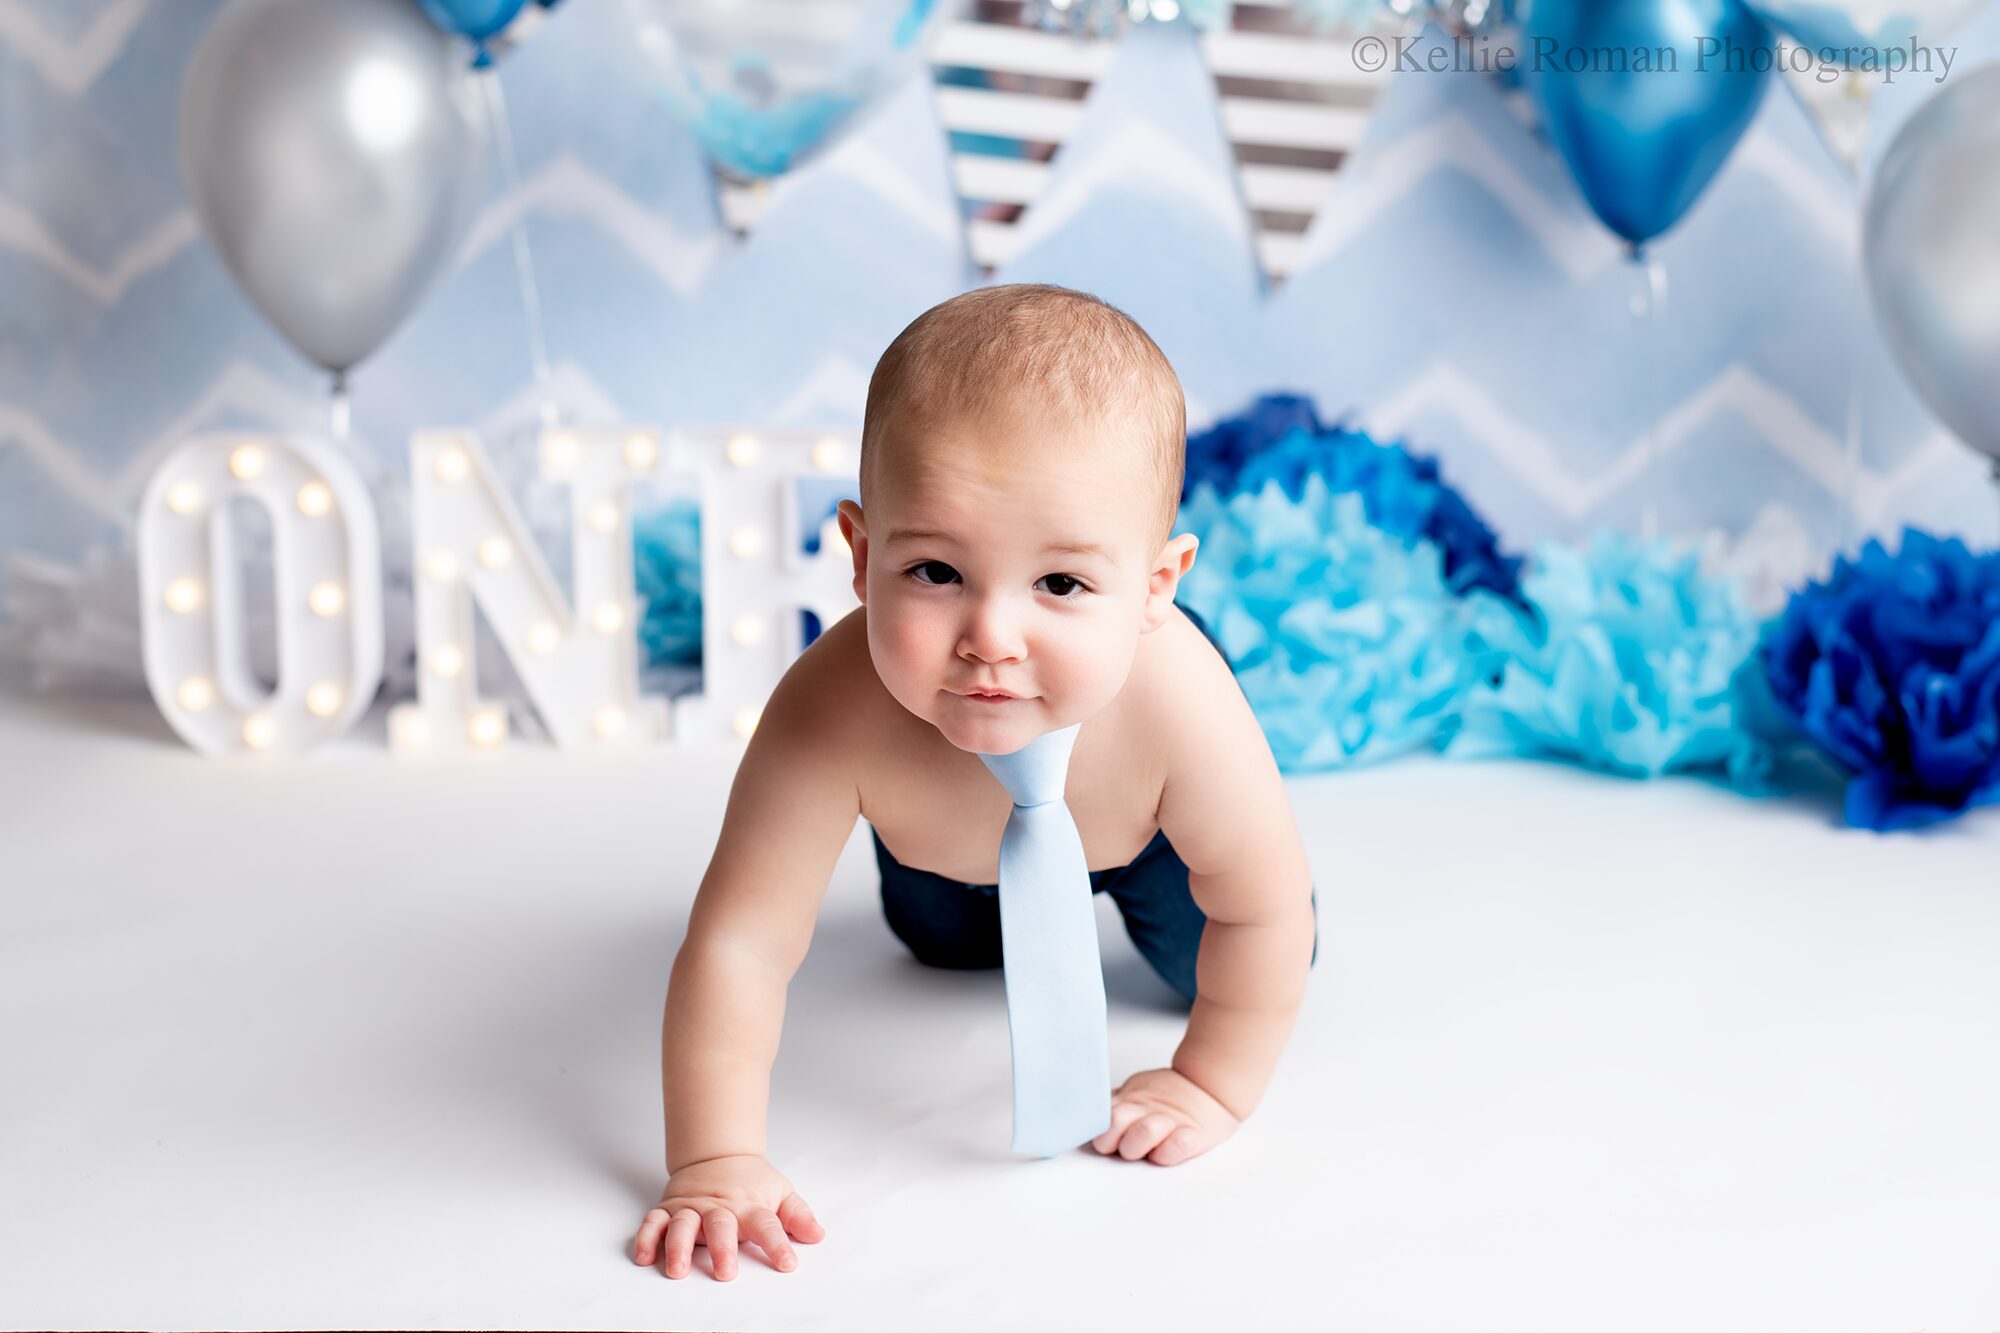 greendale cake smash. one year old boy in photo studio. he's crawling and looking at the camera. he has a baby blue tie and jeans on with no shirt. the backdrop is baby blue white and silver.